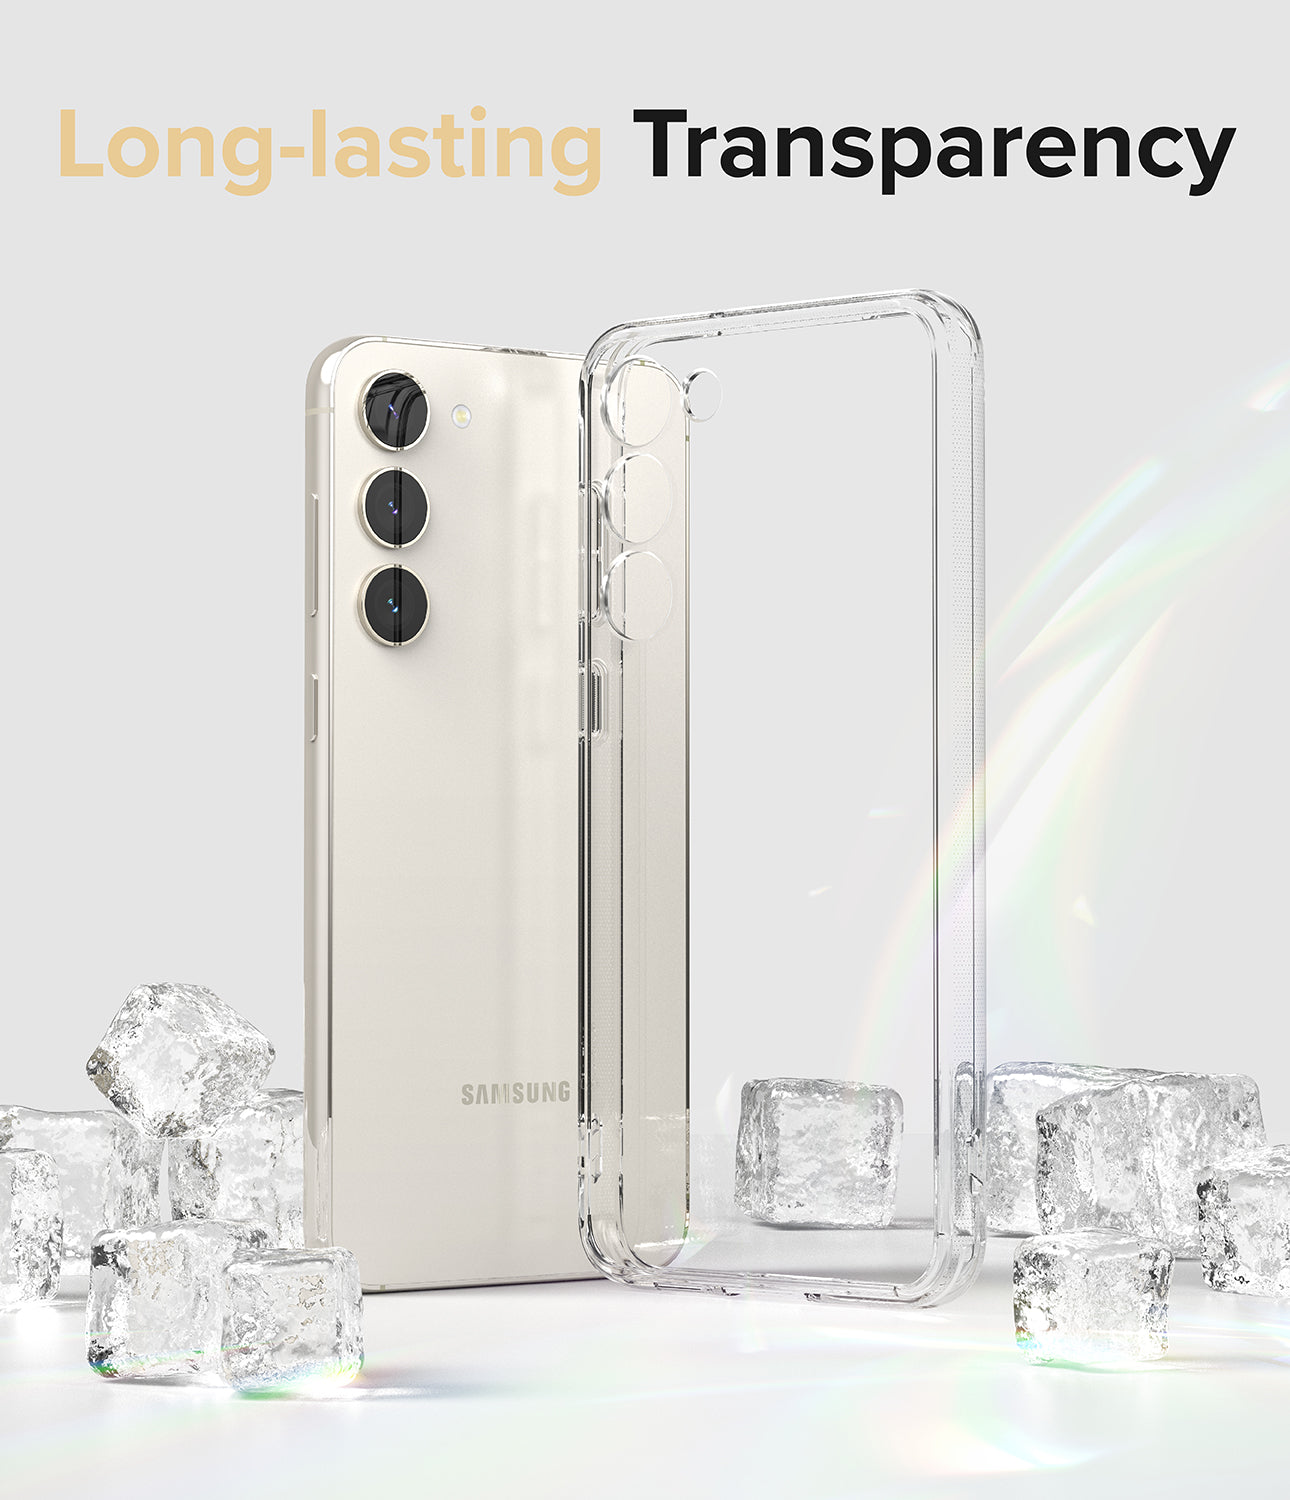 Galaxy S23 Plus Case | Fusion Clear - Lasting-lasting Transparency.